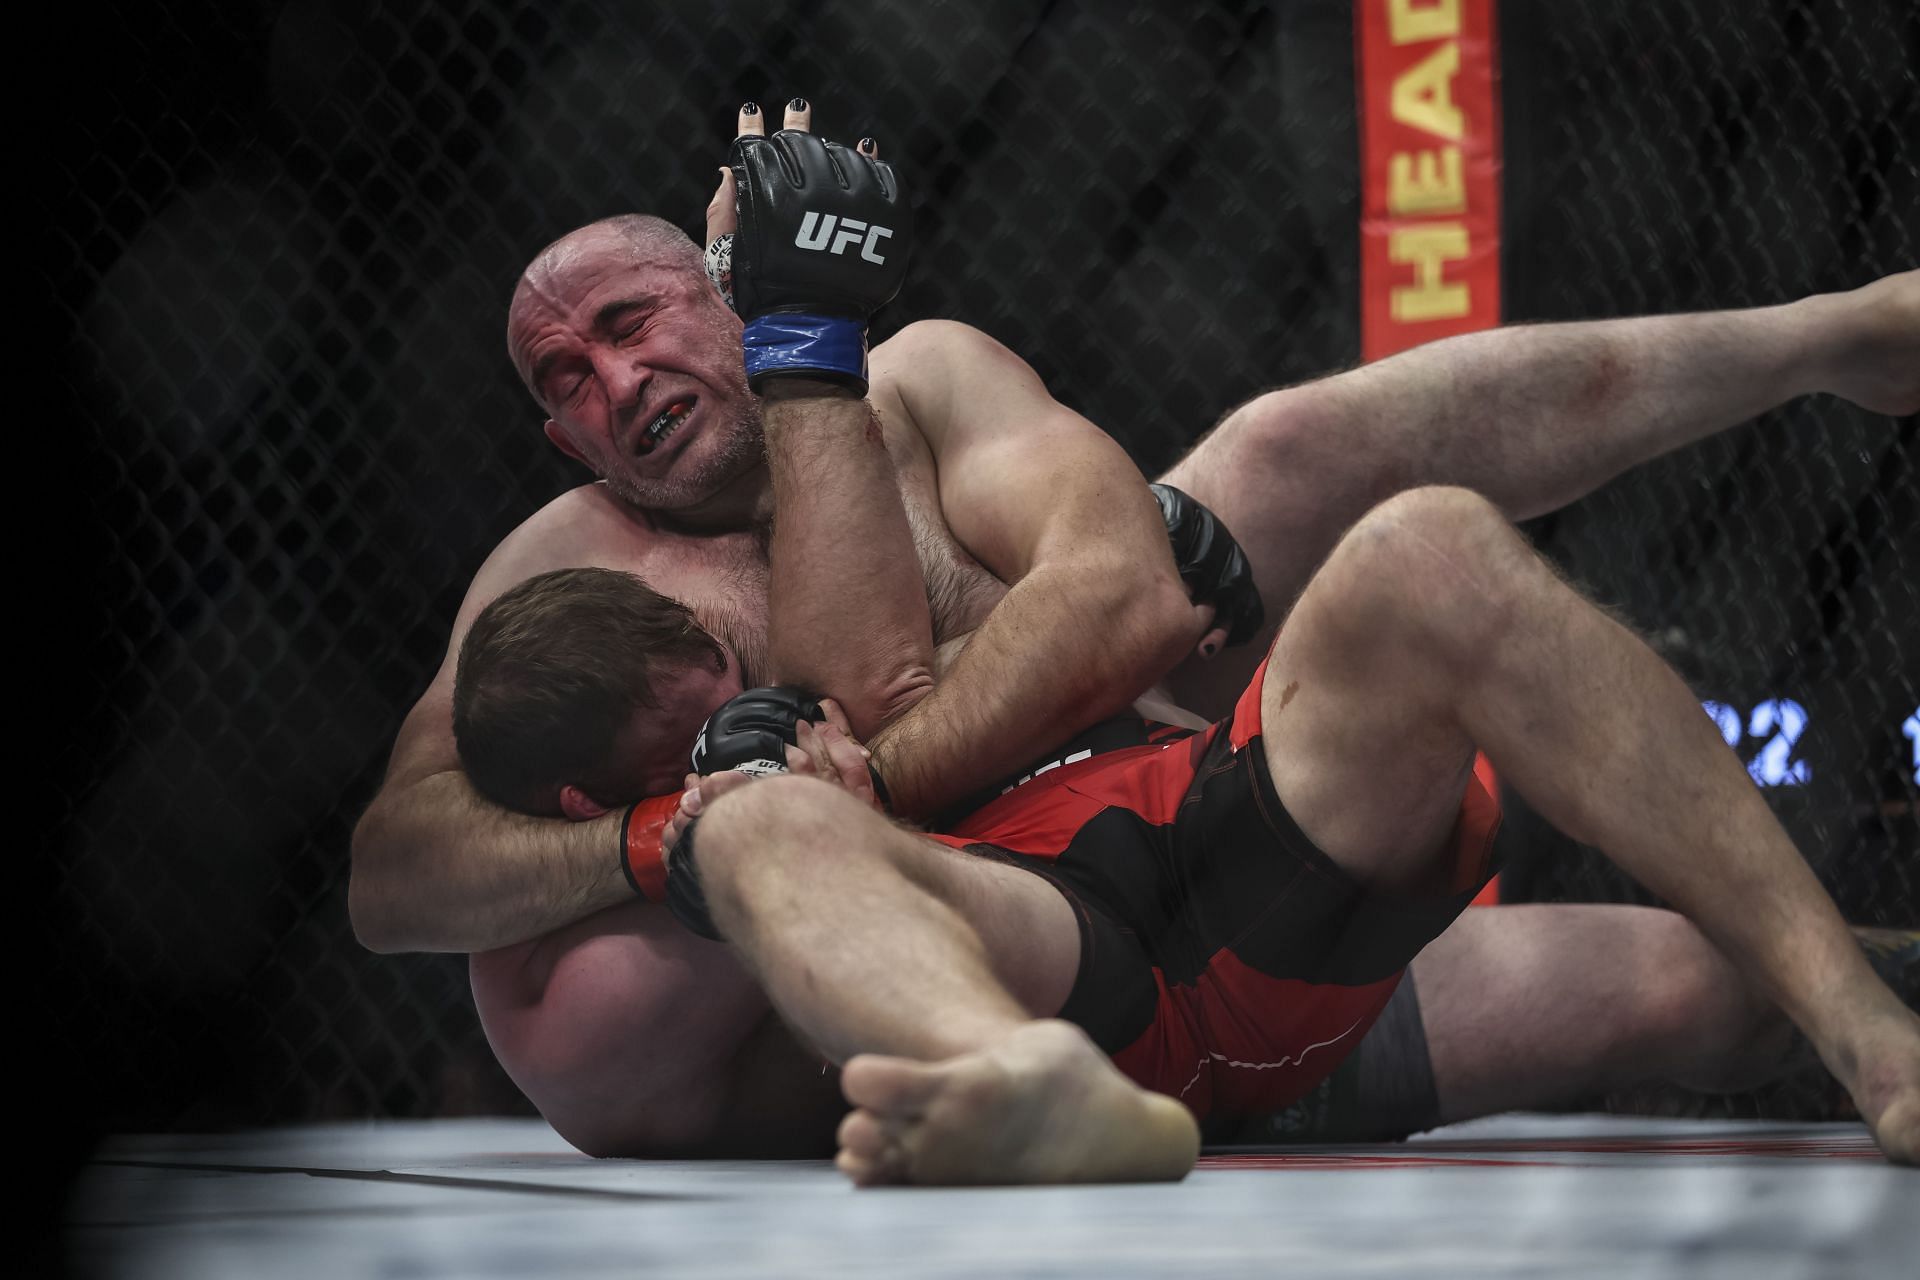 Aleksei Oleinik has secured 47 submission wins over the course of his career